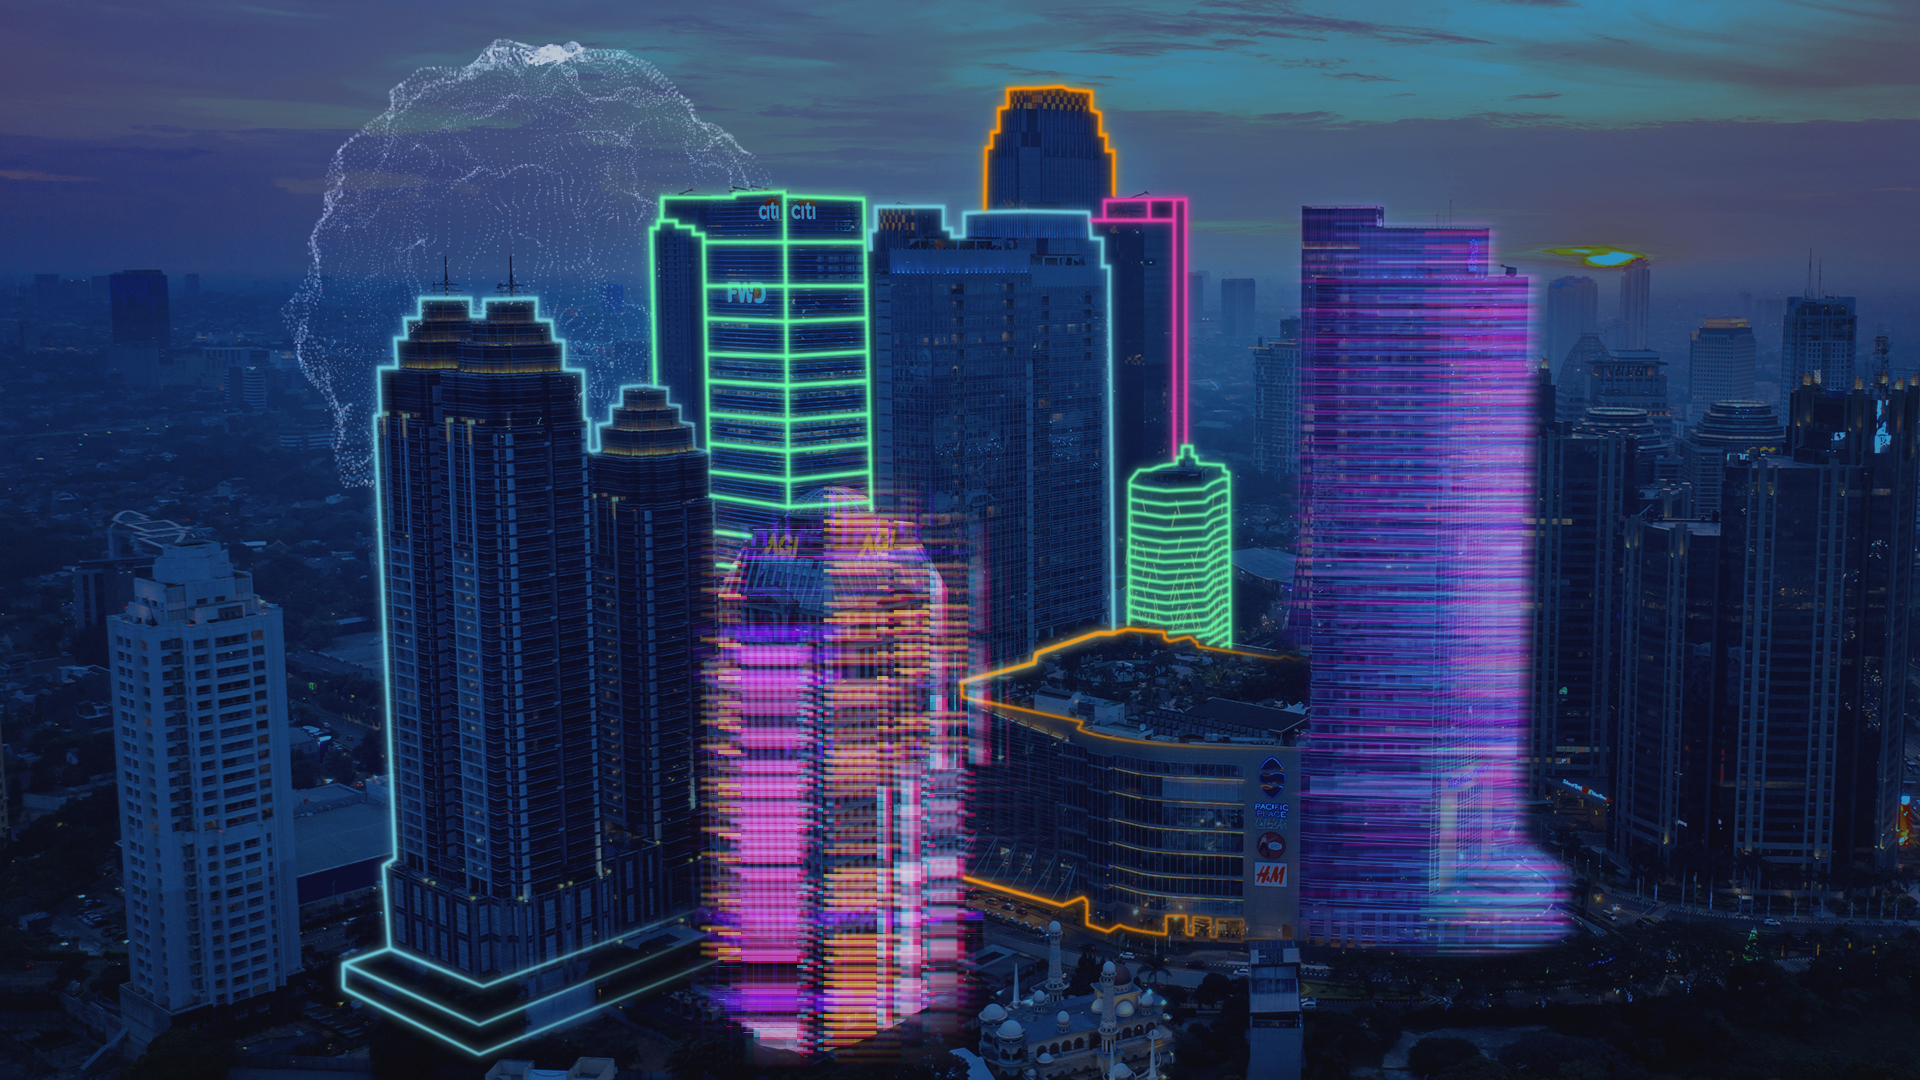 Illustration showing neon lights overlaid over a photo of a city